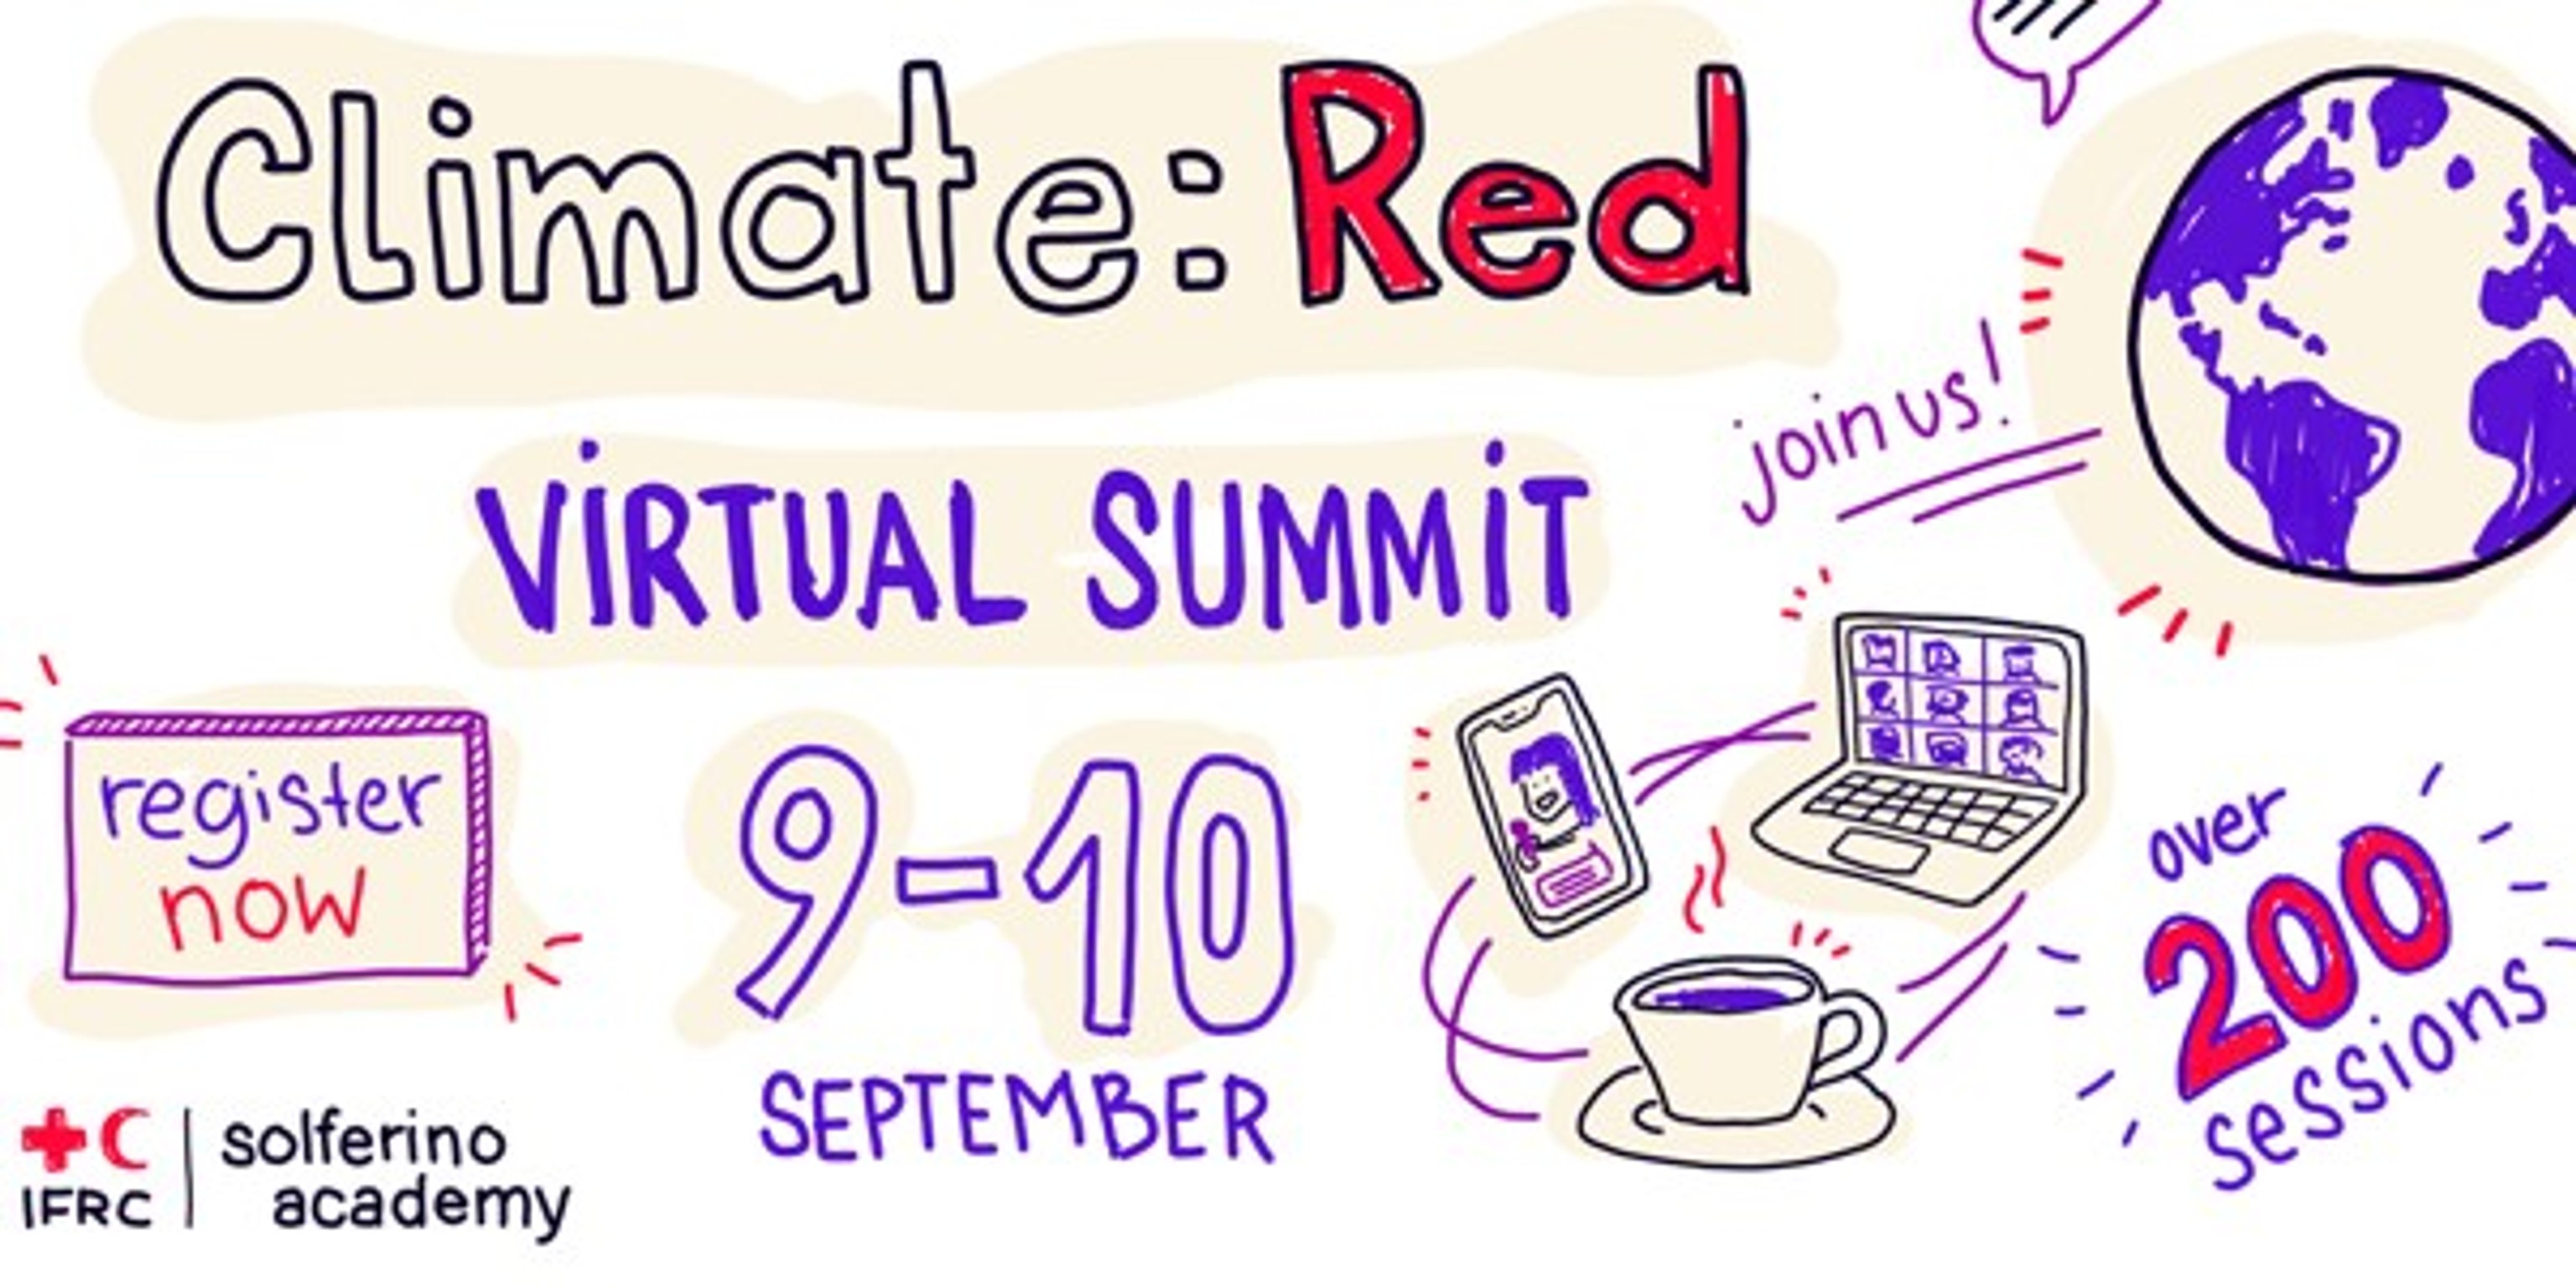 IFRC climate:red virtual climate summit